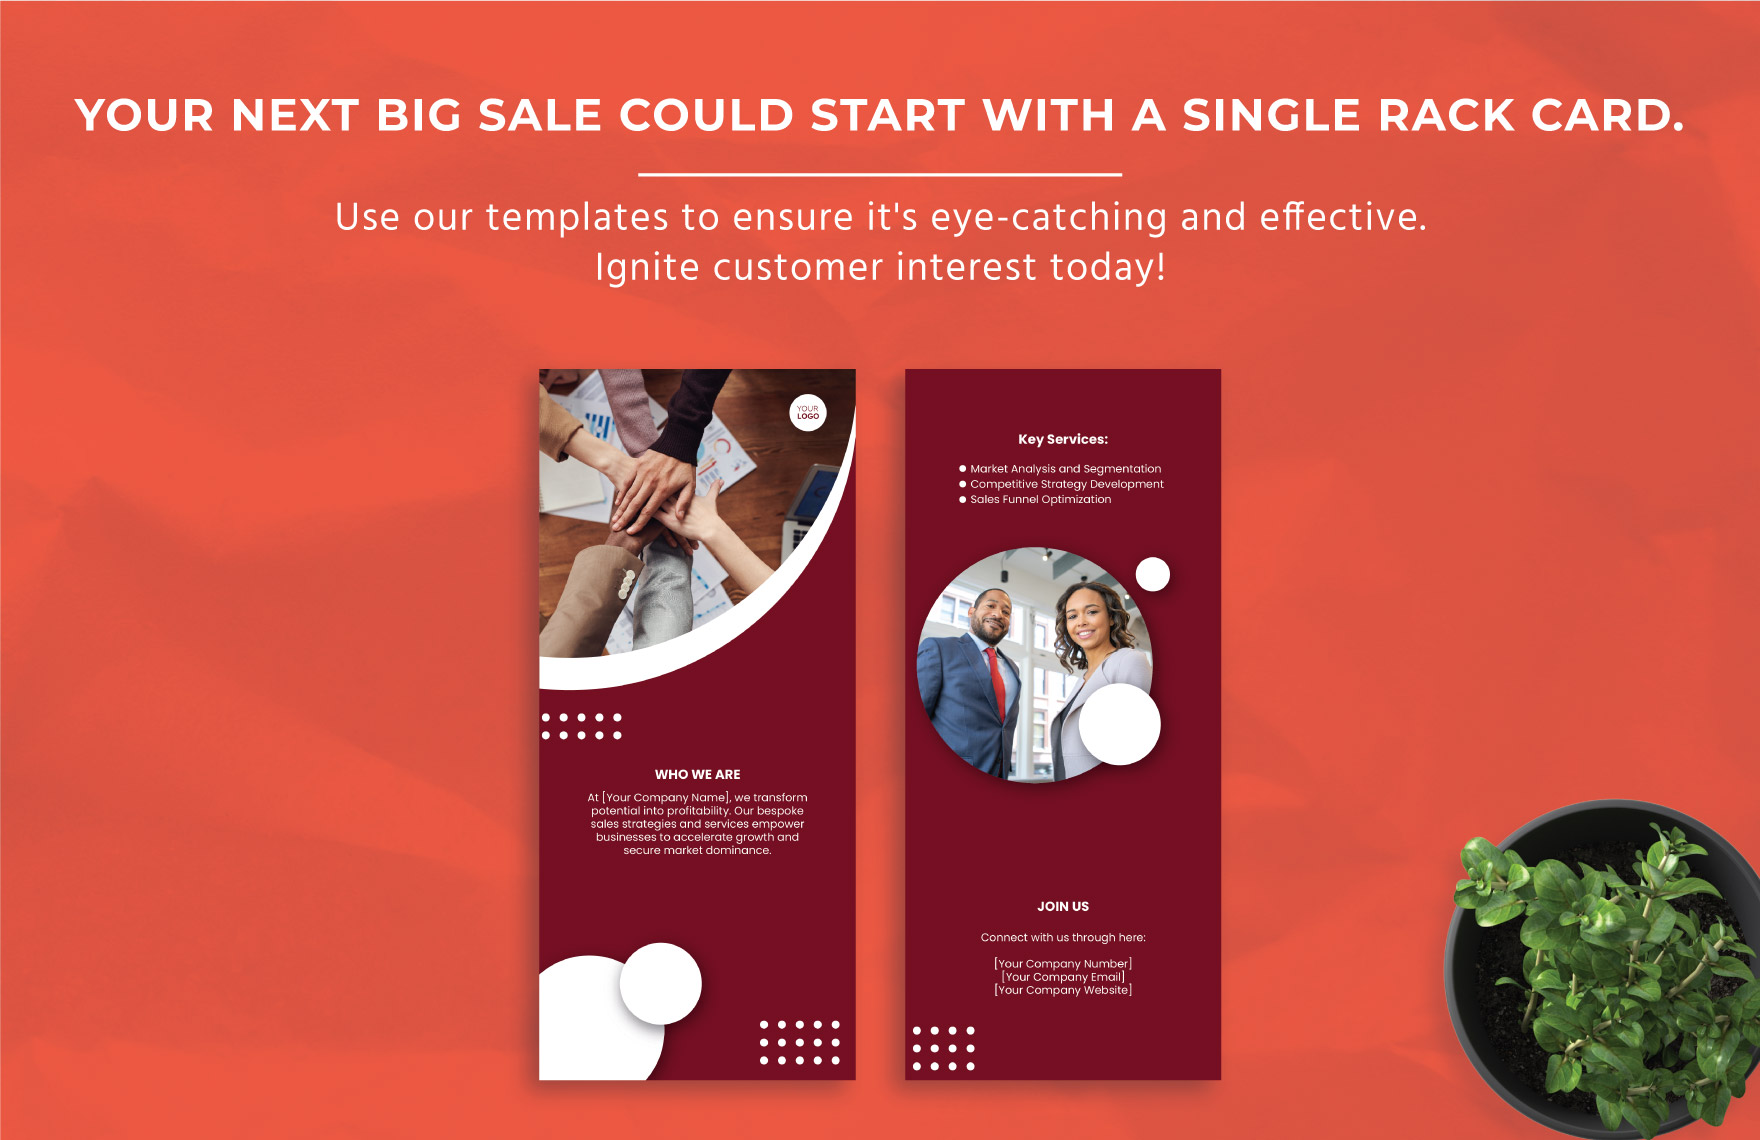 Sales Services Overview Rack Card Template